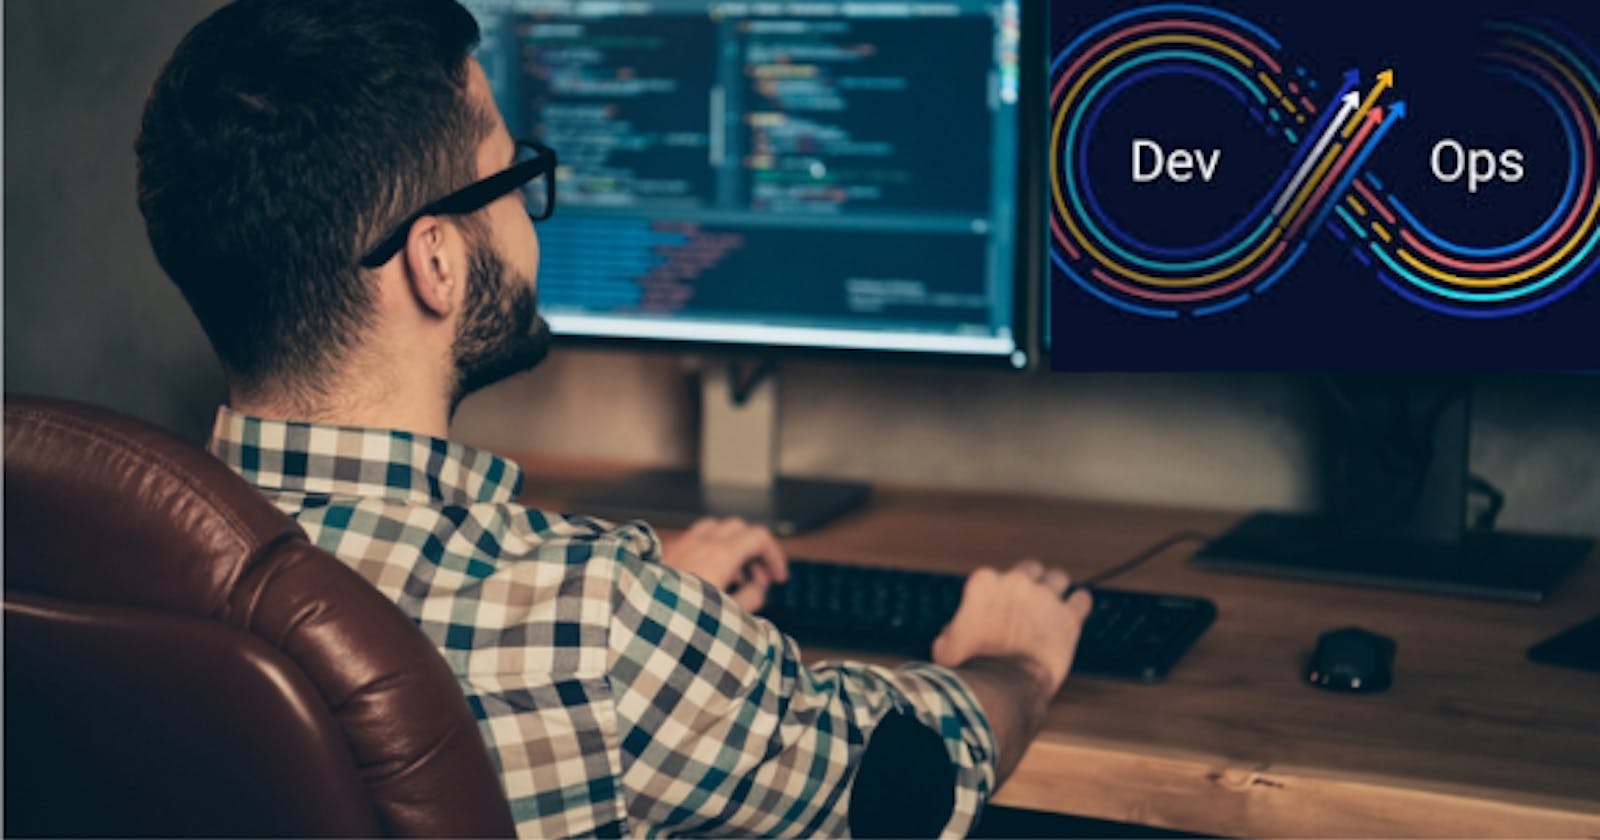 DevOps the path that leads to remote jobs?